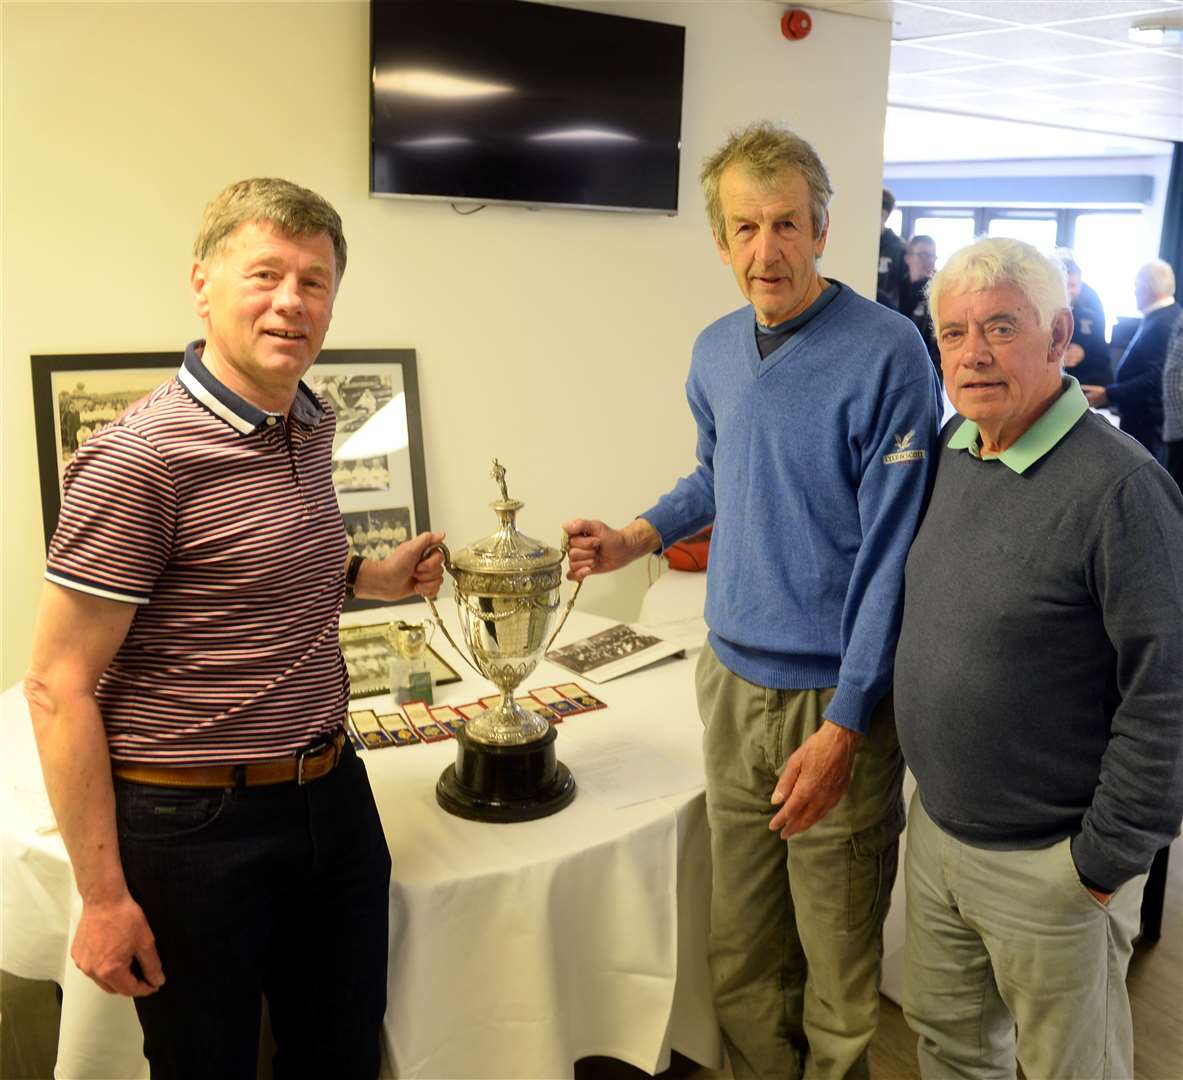 Thistle legend David Milroy with Nairn's Robin Mitchell and Roshie Fraser of Thistle and Clach, all winners of the Inverness Cup.